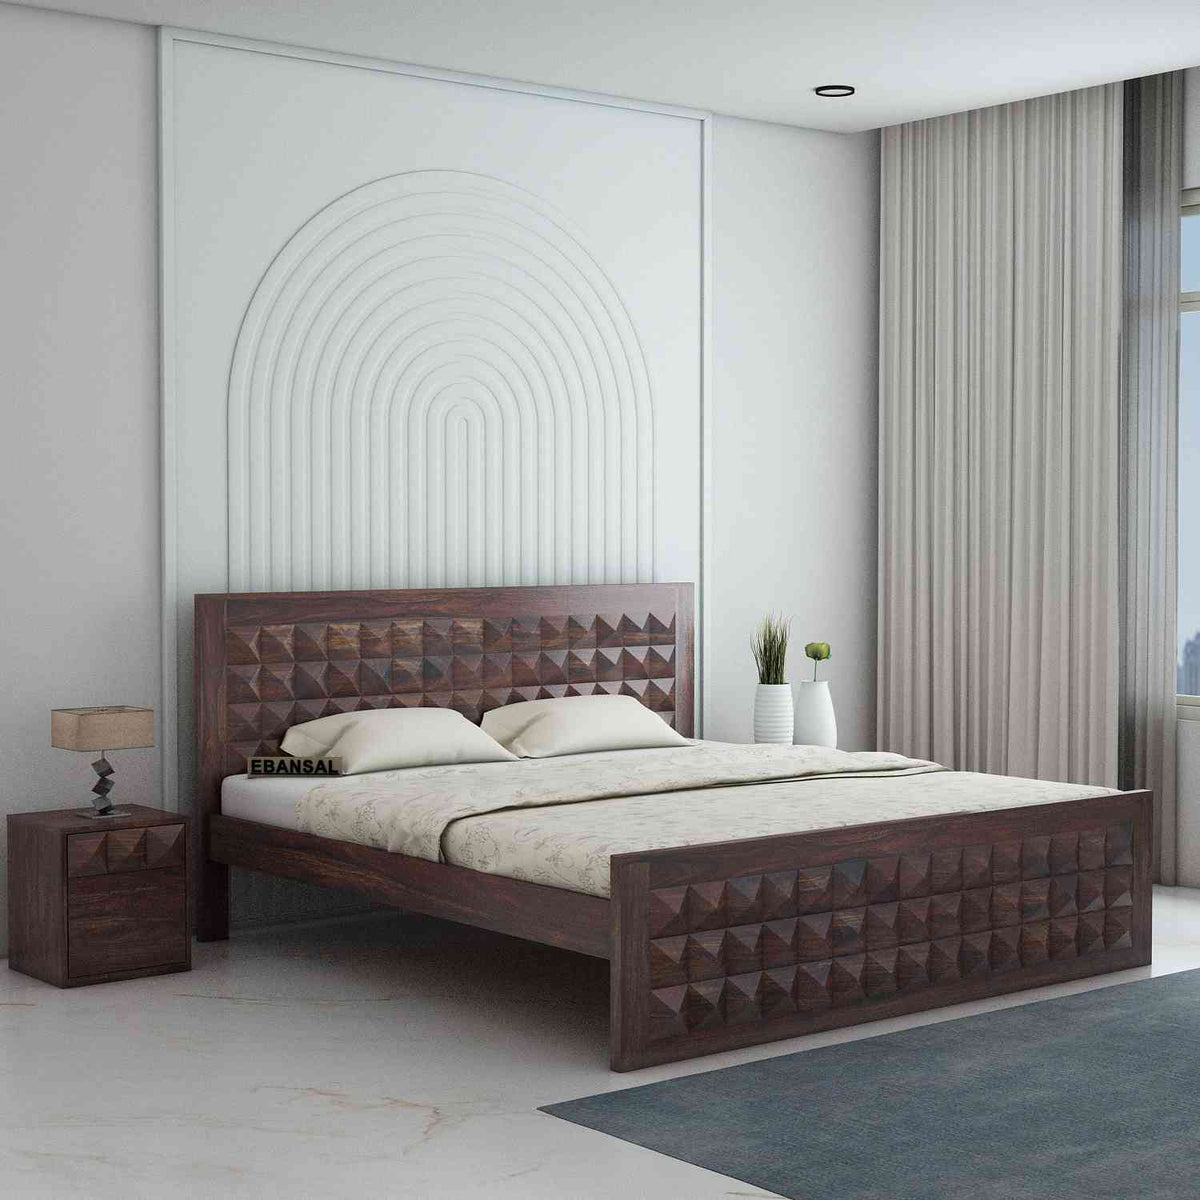 Sofia Solid Sheesham Wood Bed Without Storage (Queen Size, Walnut Finish)